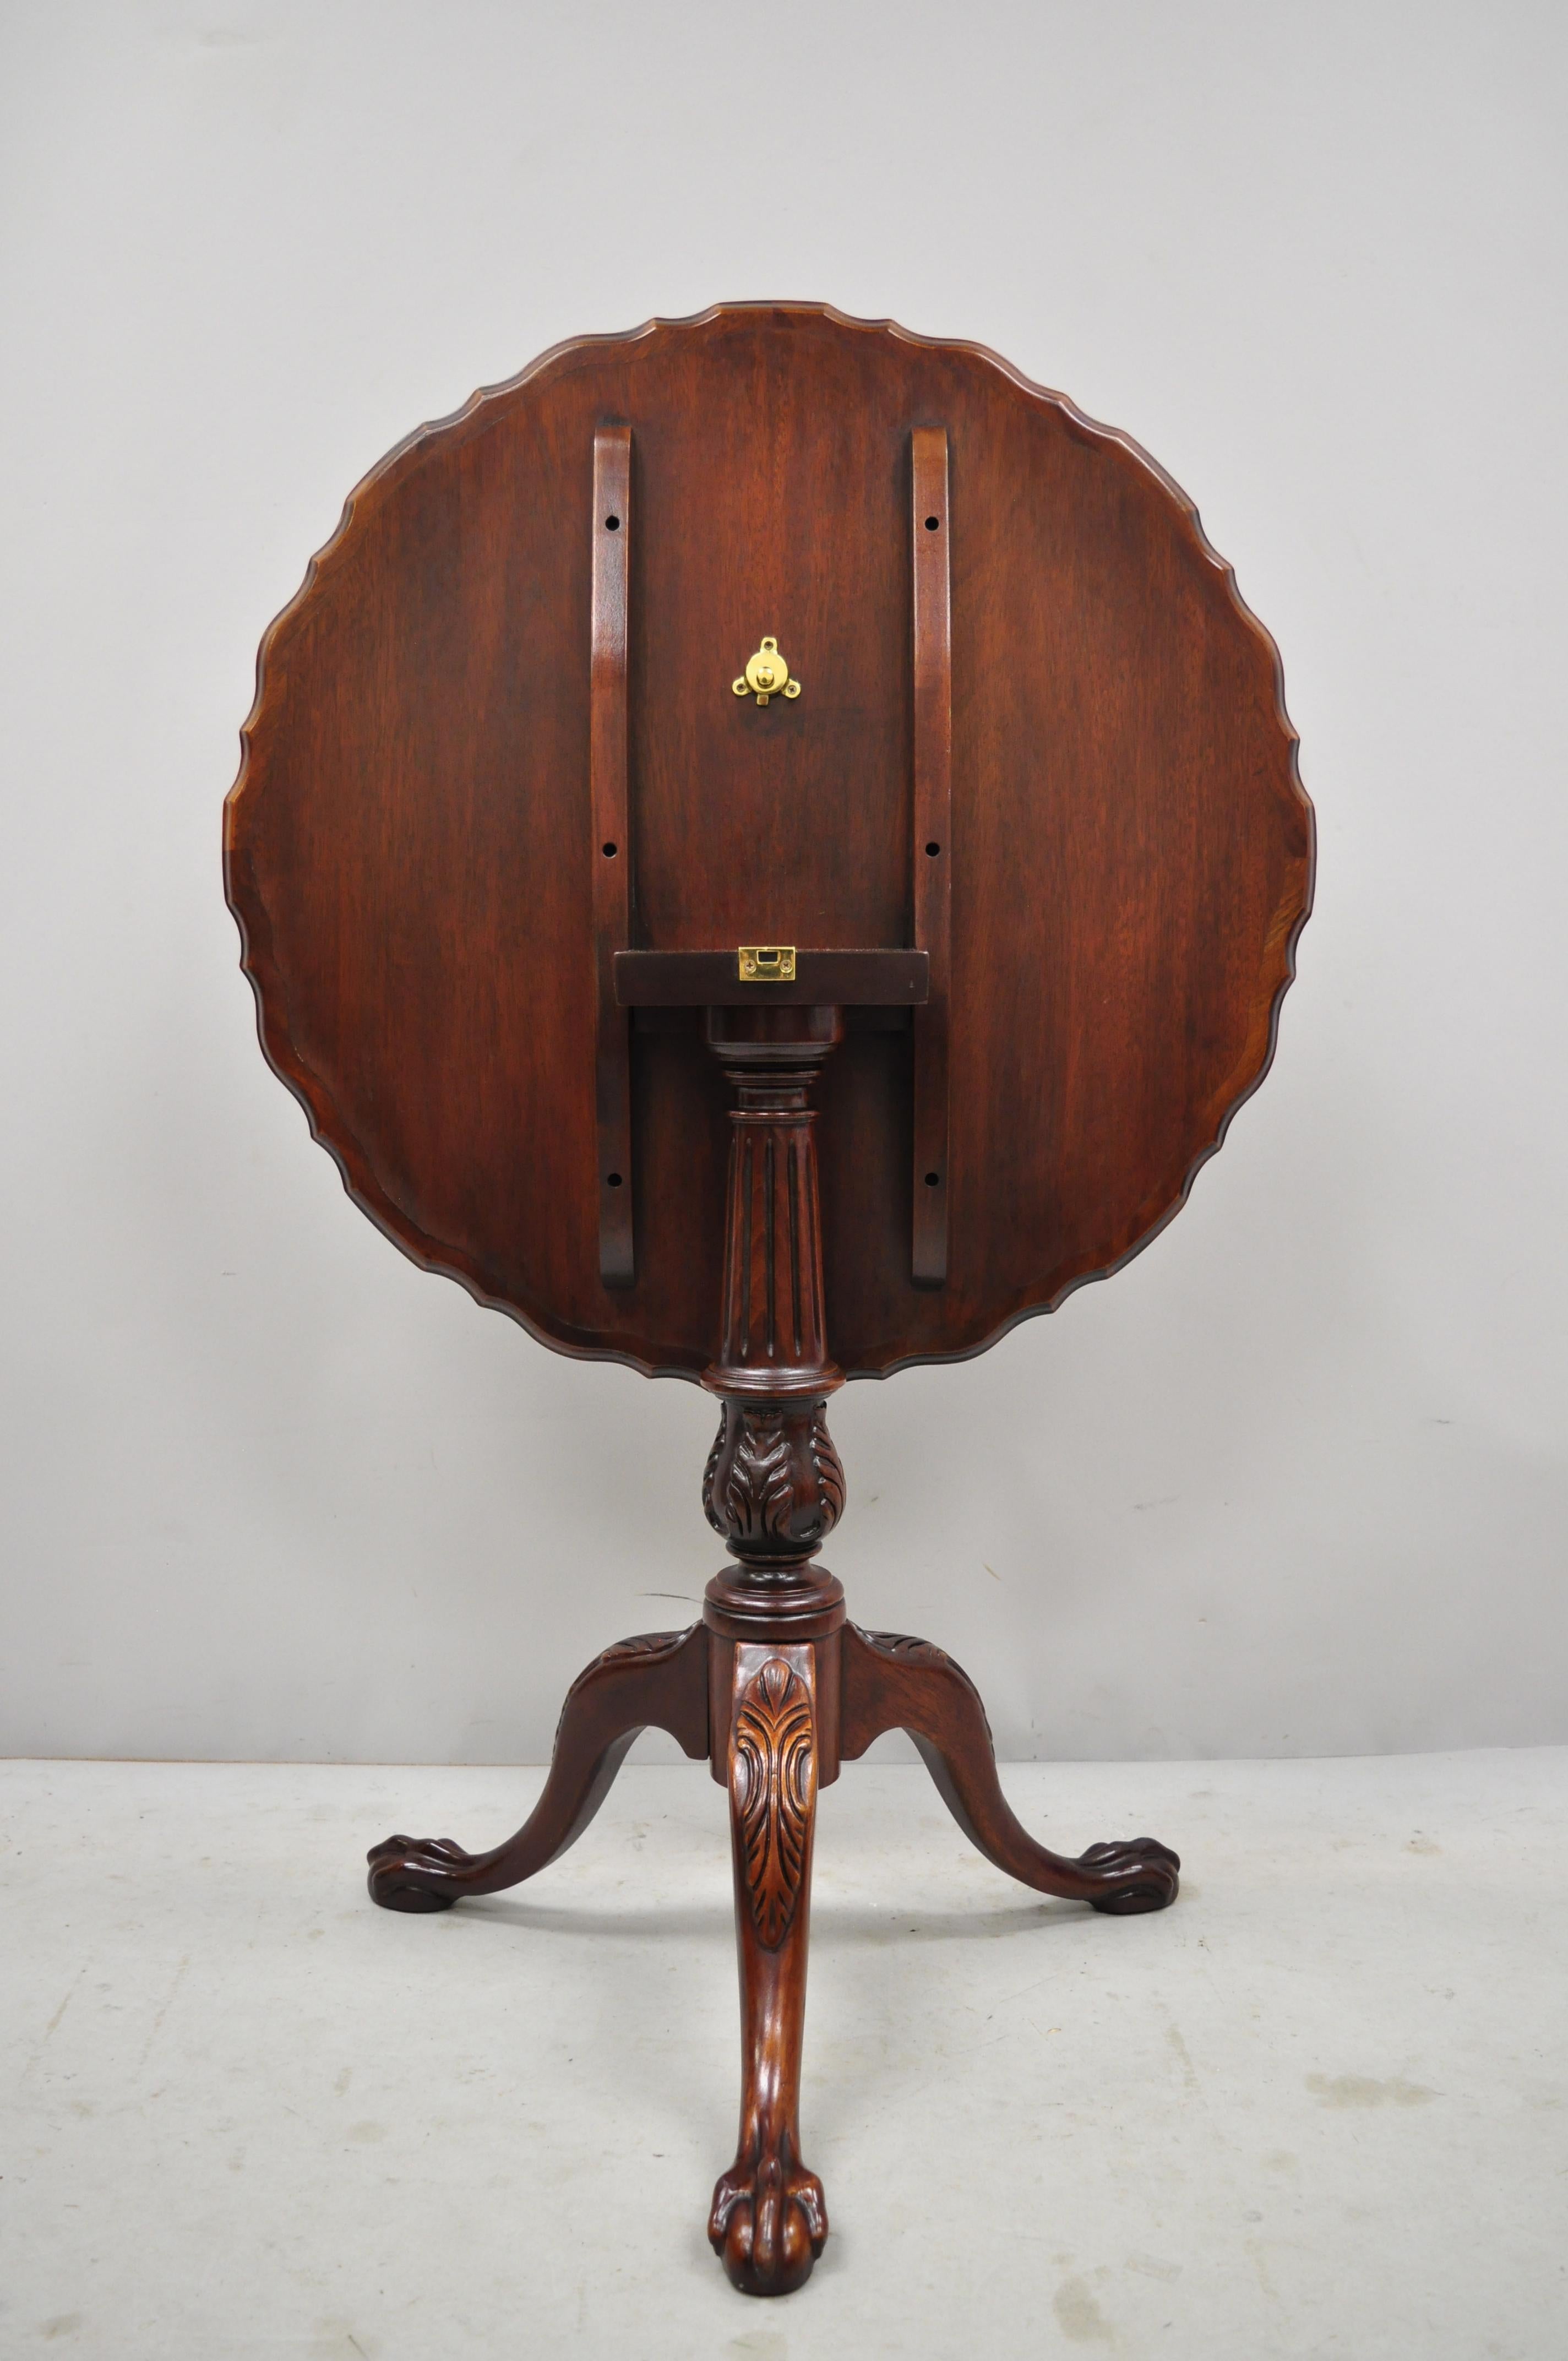 20th Century Mahogany Pie Crust Ball and Claw Georgian Chippendale Style Tilt Top Tea Table